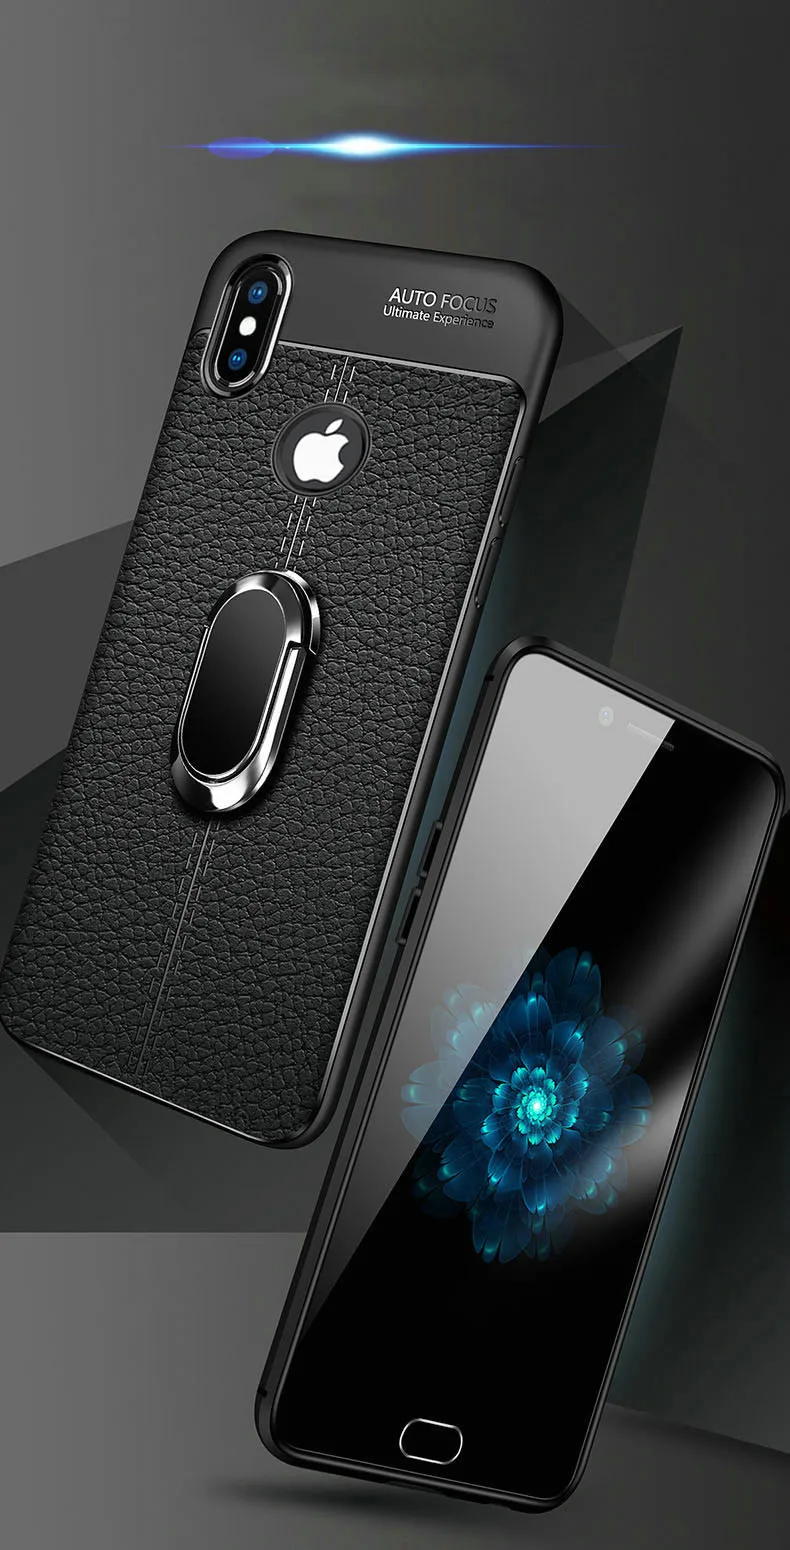 Soft Silicone Back cover for iPhone 11 X XR XS Max Pro With Magnetic Car Holder Case for iPhone 11 7 8 6 6S Plus 5 5S SE phone